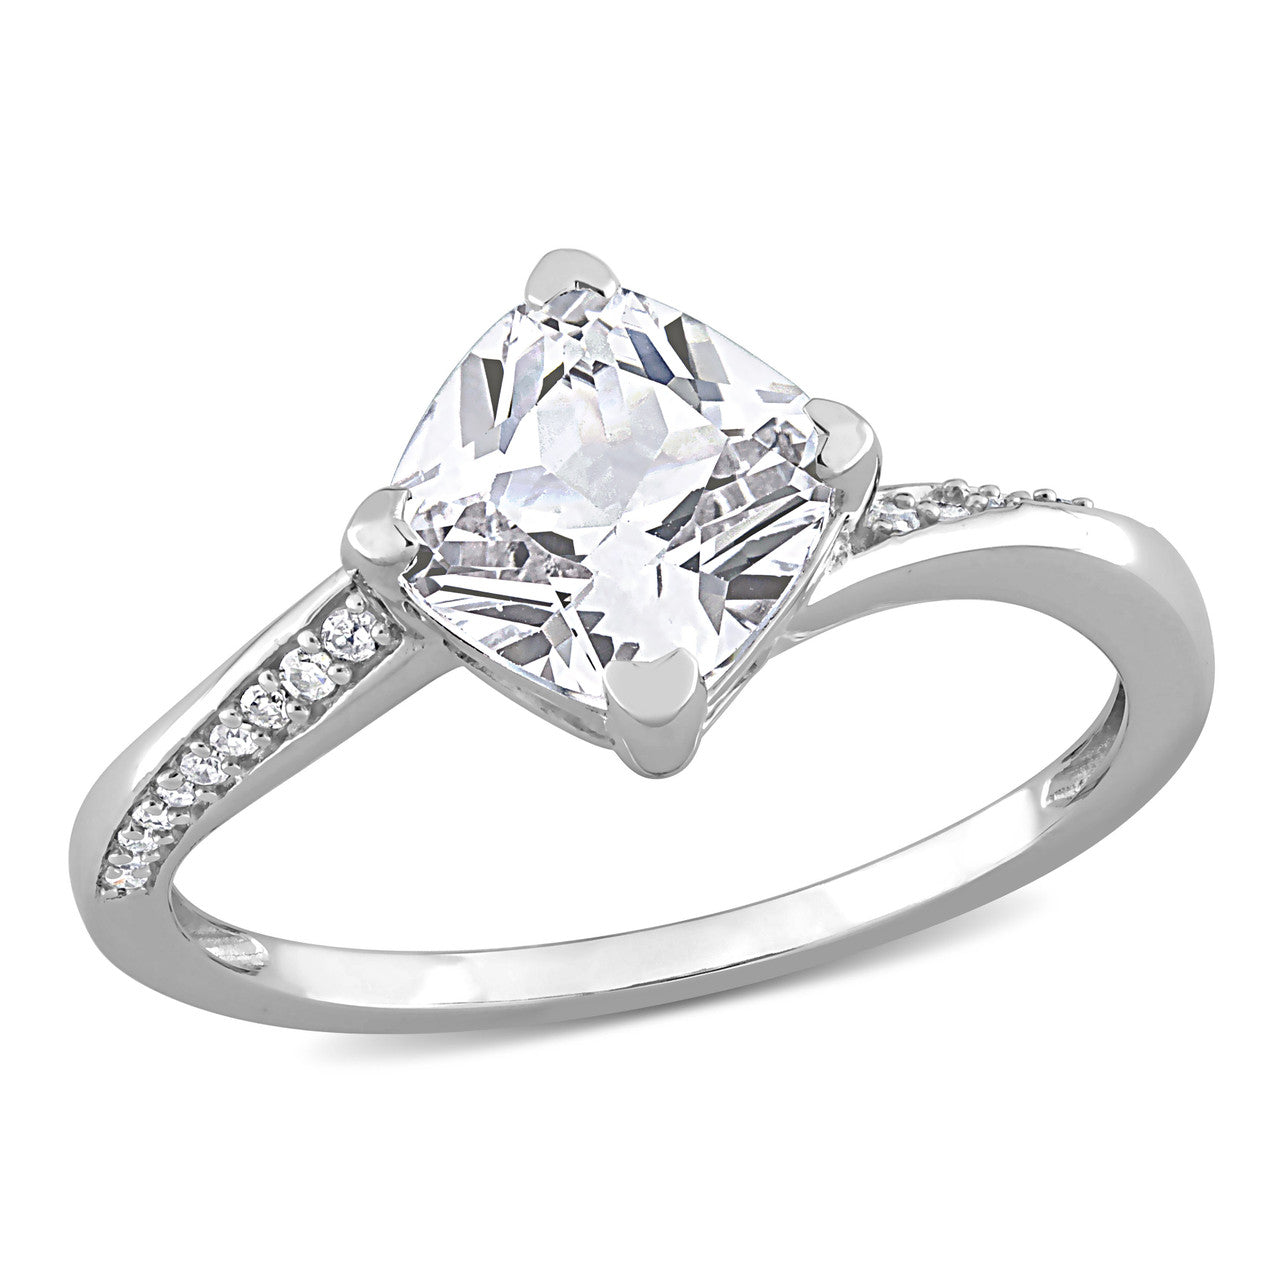 Ice Jewellery 0.07 CT Diamond And 2 CT Created White Sapphire Solitaire Ring in 10k White Gold - 75000005719 | Ice Jewellery Australia